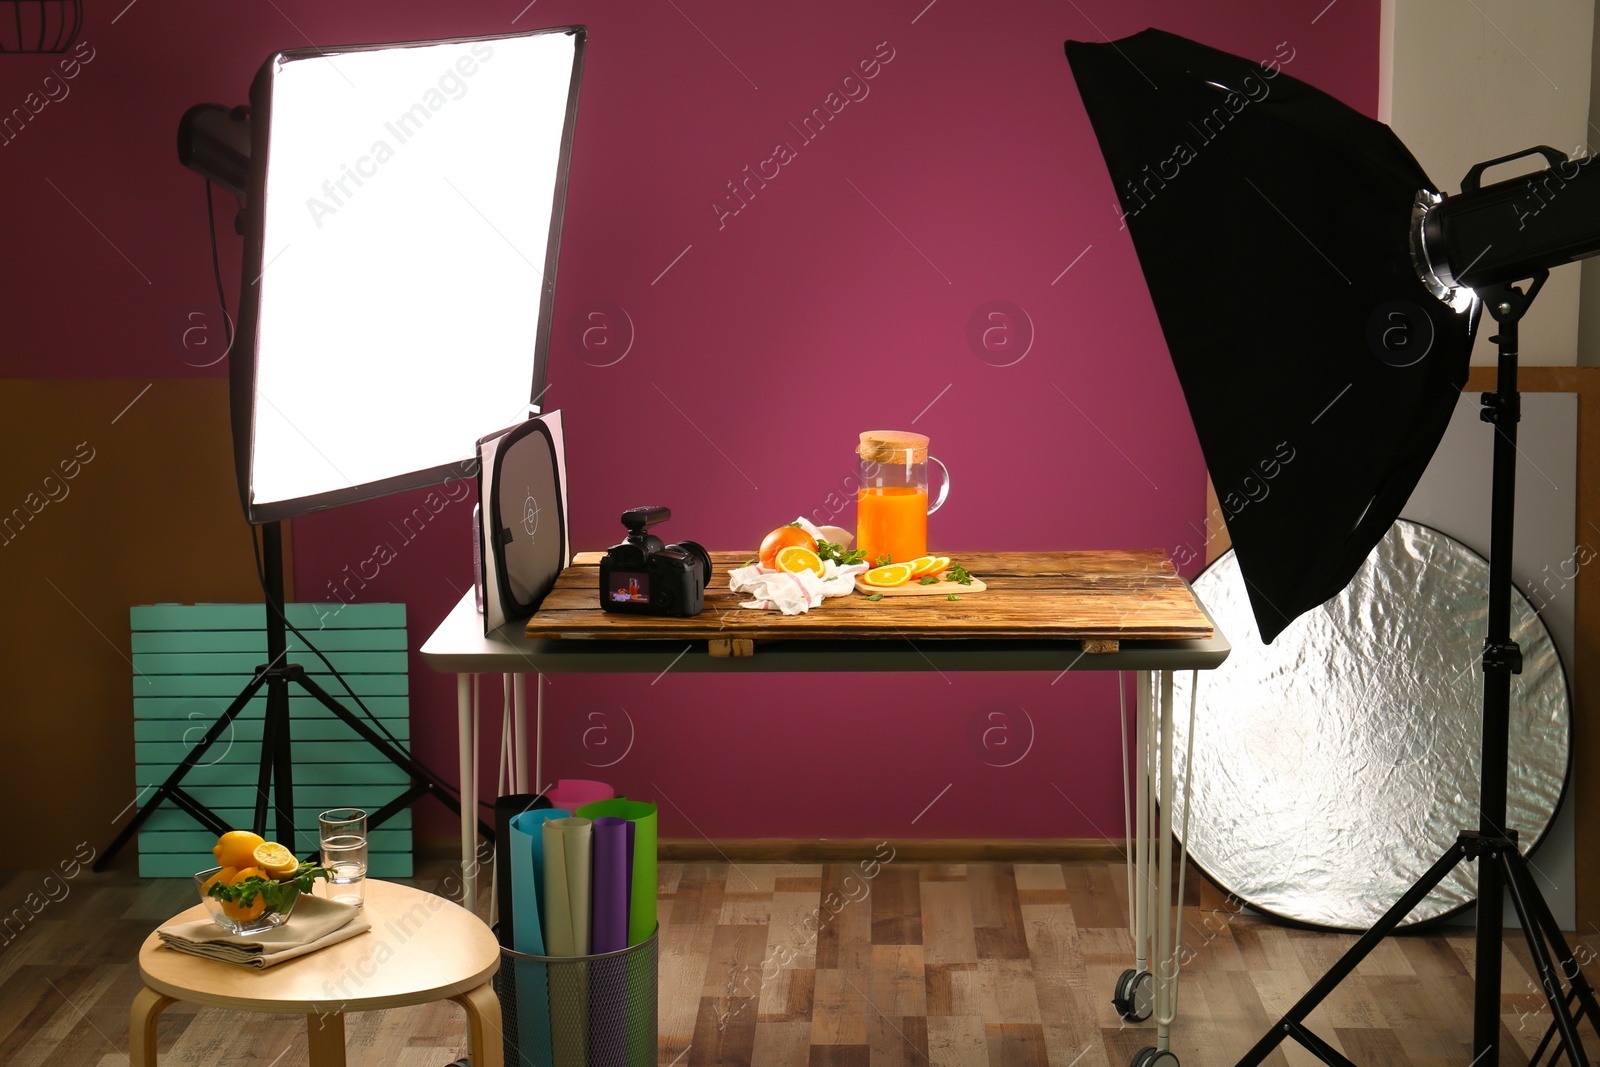 Photo of Cut oranges and jug with juice on table. Food photography